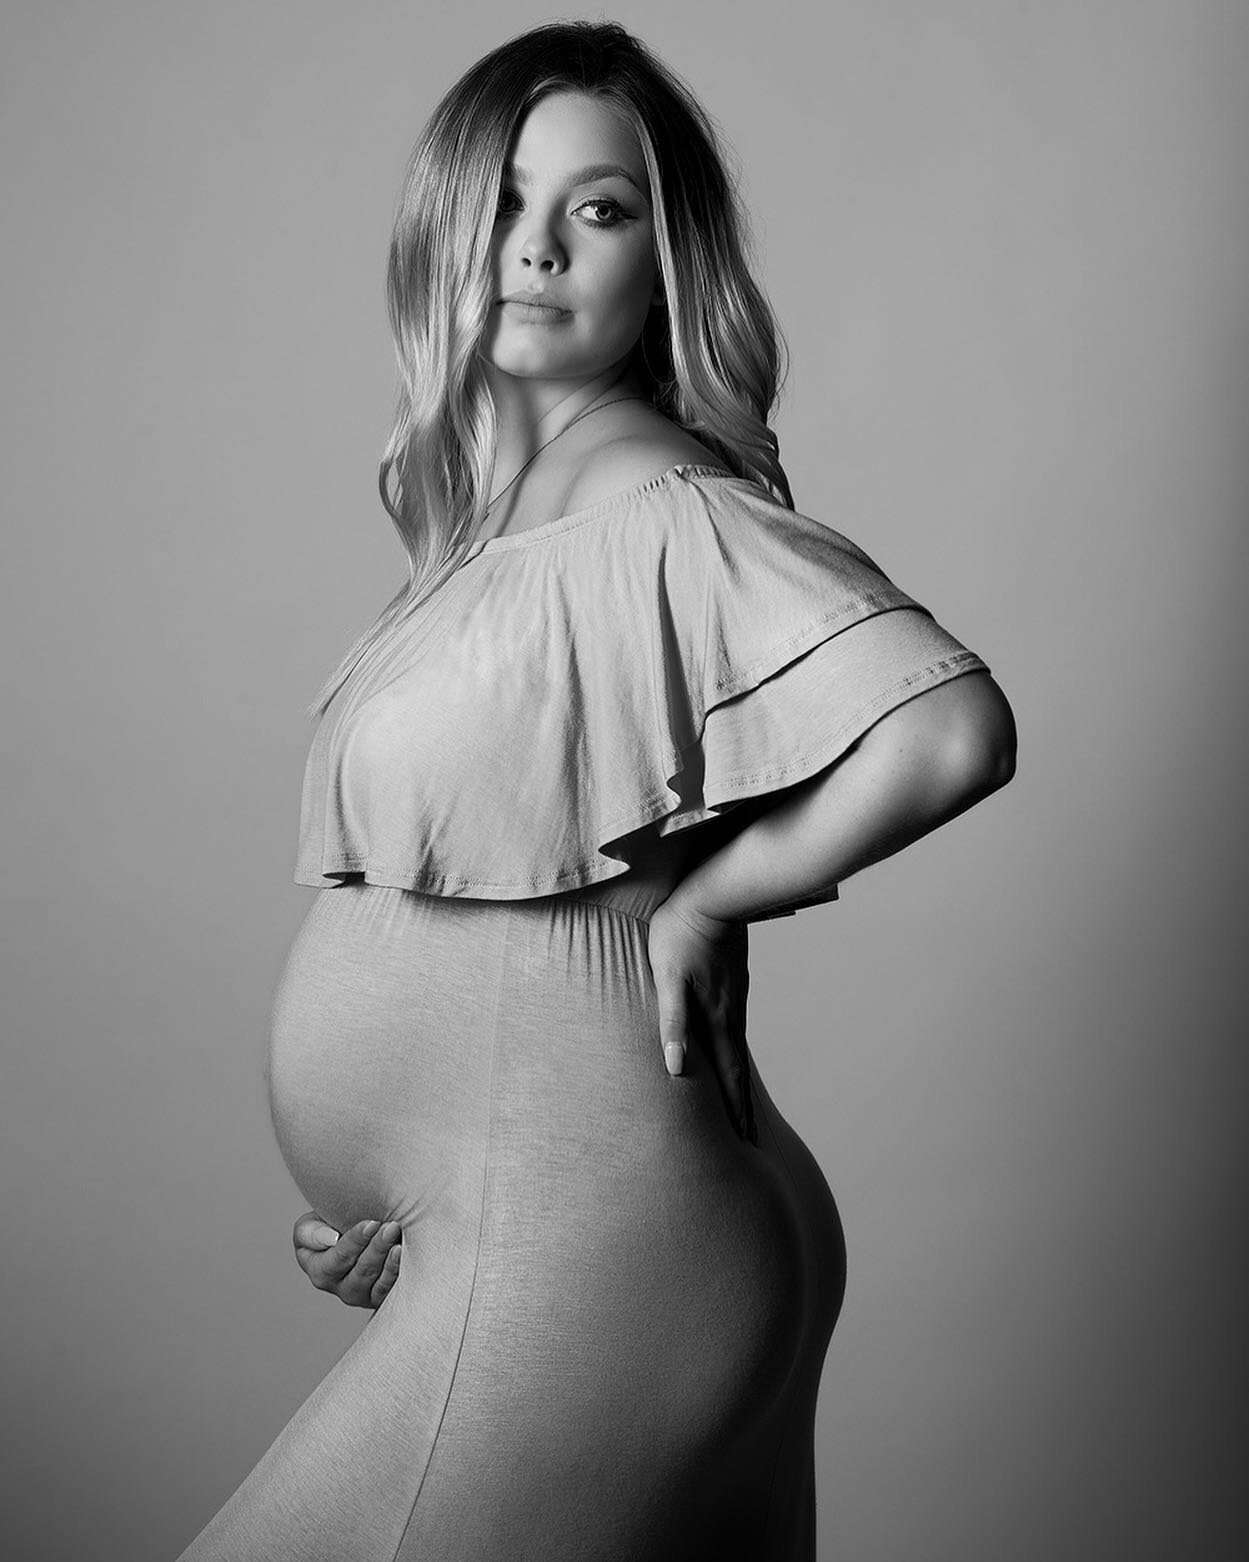 Here is the second look we did today. Proud papa and grandpa to be. Love shooting with my daughter. Something great in this crazy world. .
.
#kyraharben #scottharbenphotography #scottharbenphotographer #profoto #parabolix #pregnant #pregnantphotograp